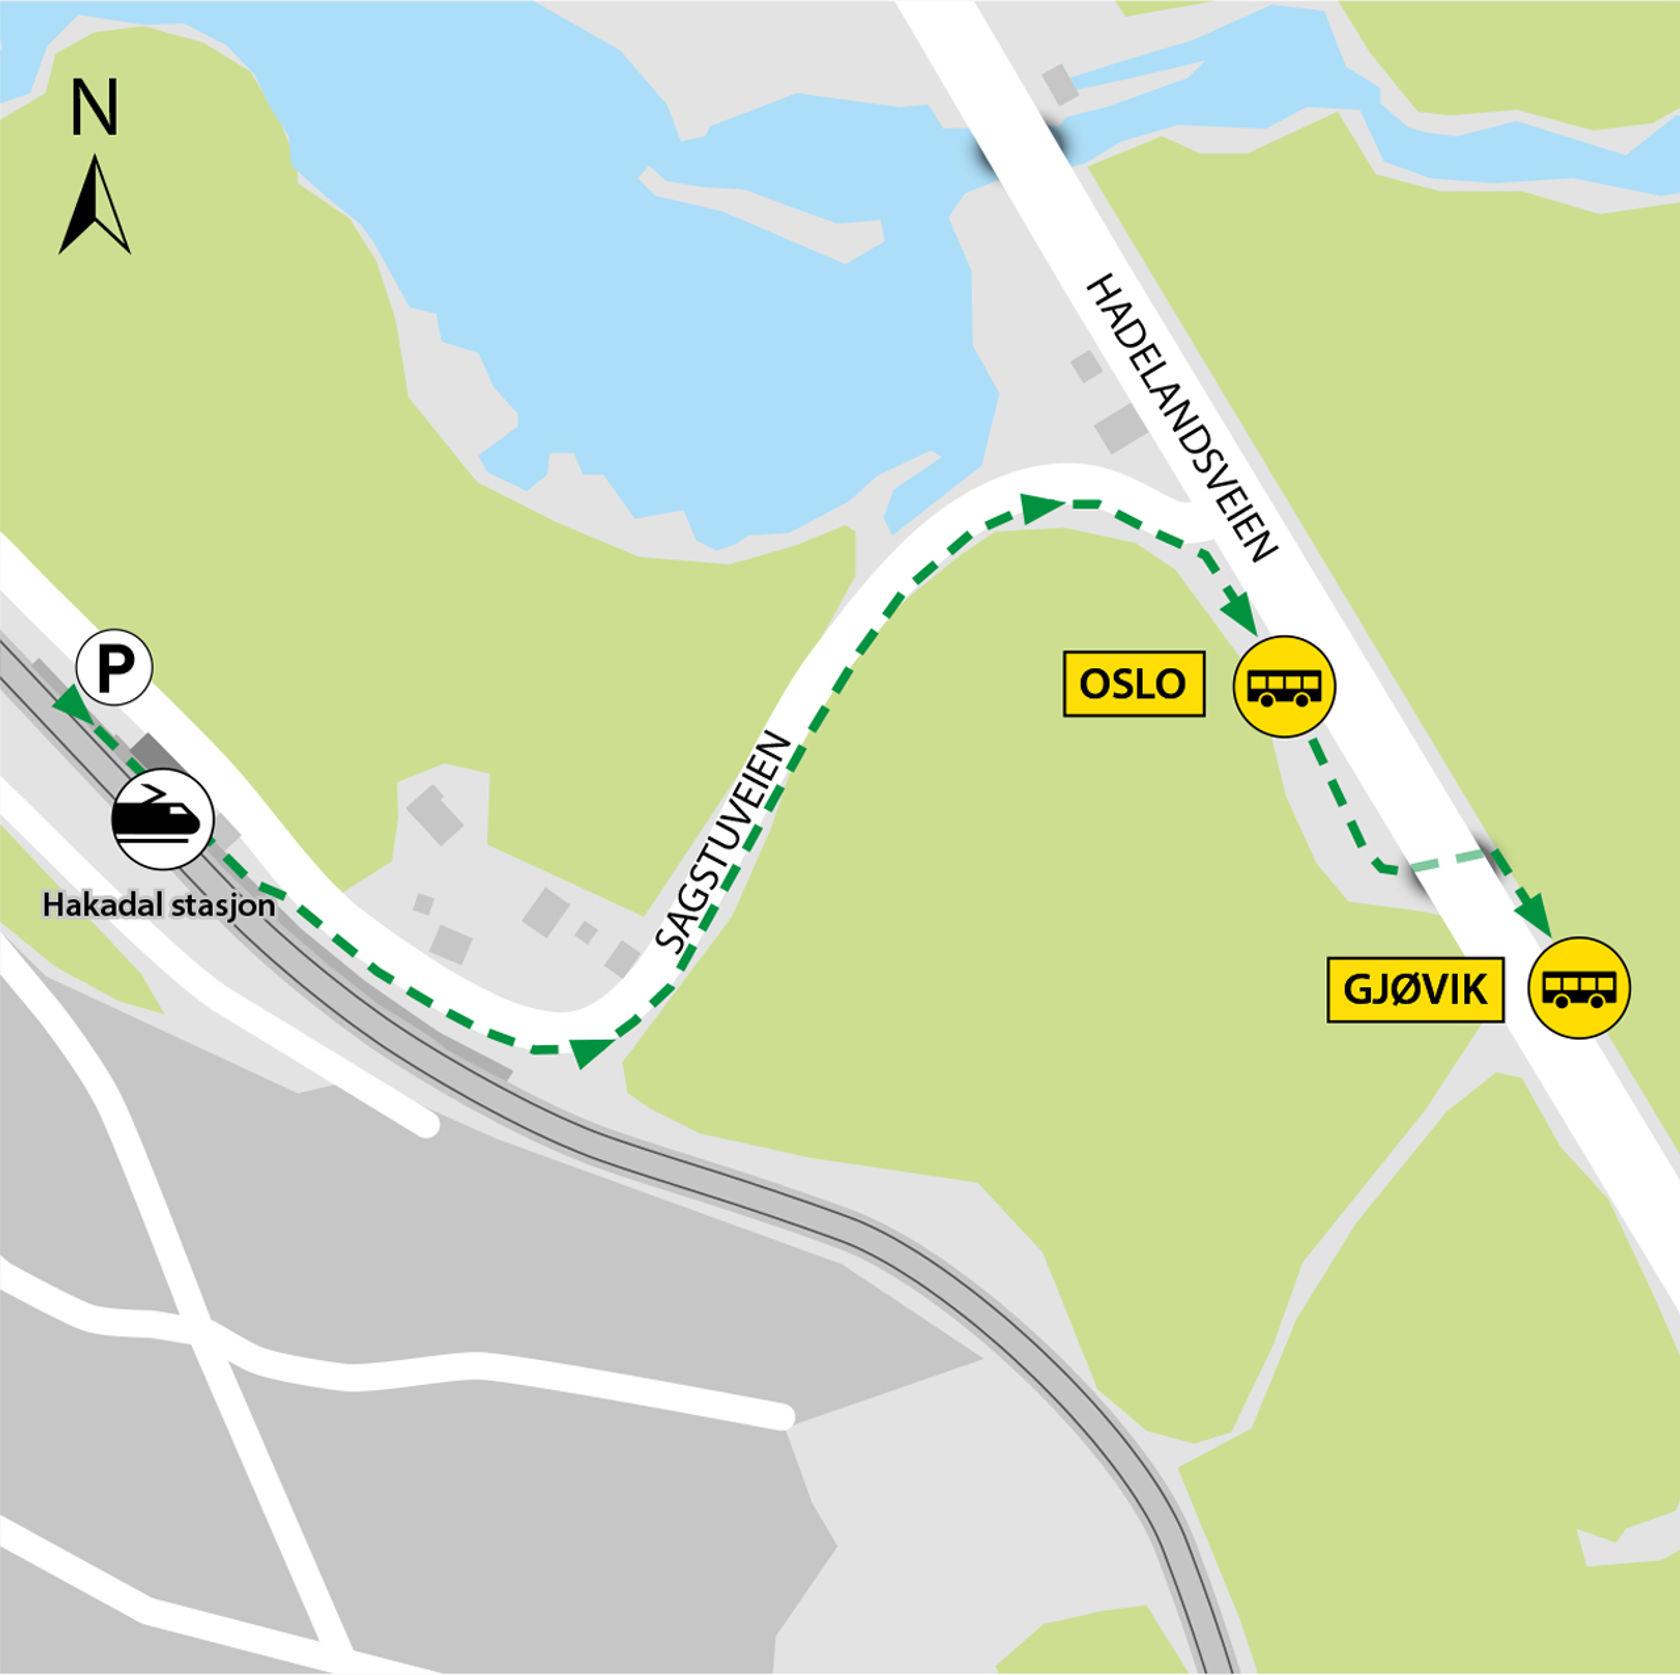 Map shows rail replacement service departs from bus stop Sagstua located in Hadelandsveien